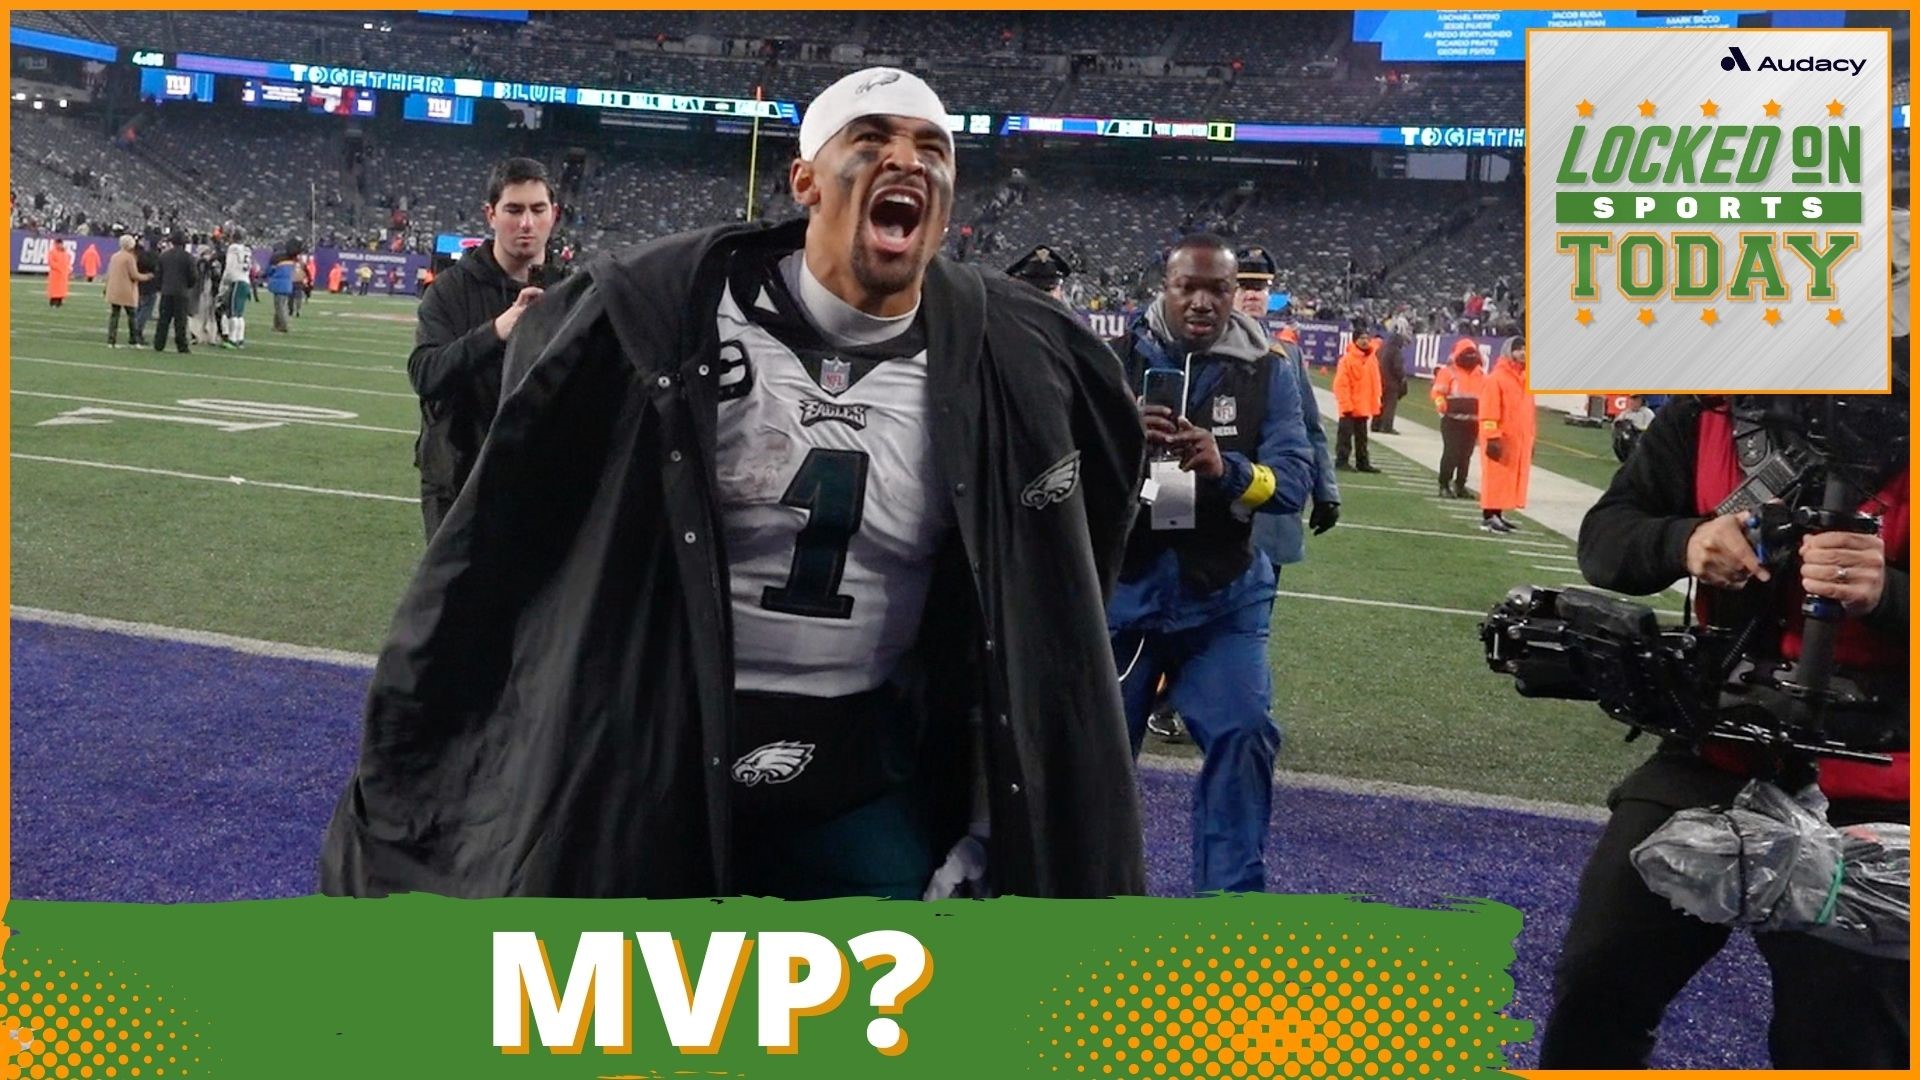 Discussing the day's top sports stories from where Jalen Hurts stands in the MVP race to Lions upset Vikings and Lakers finish road trip on a positive.